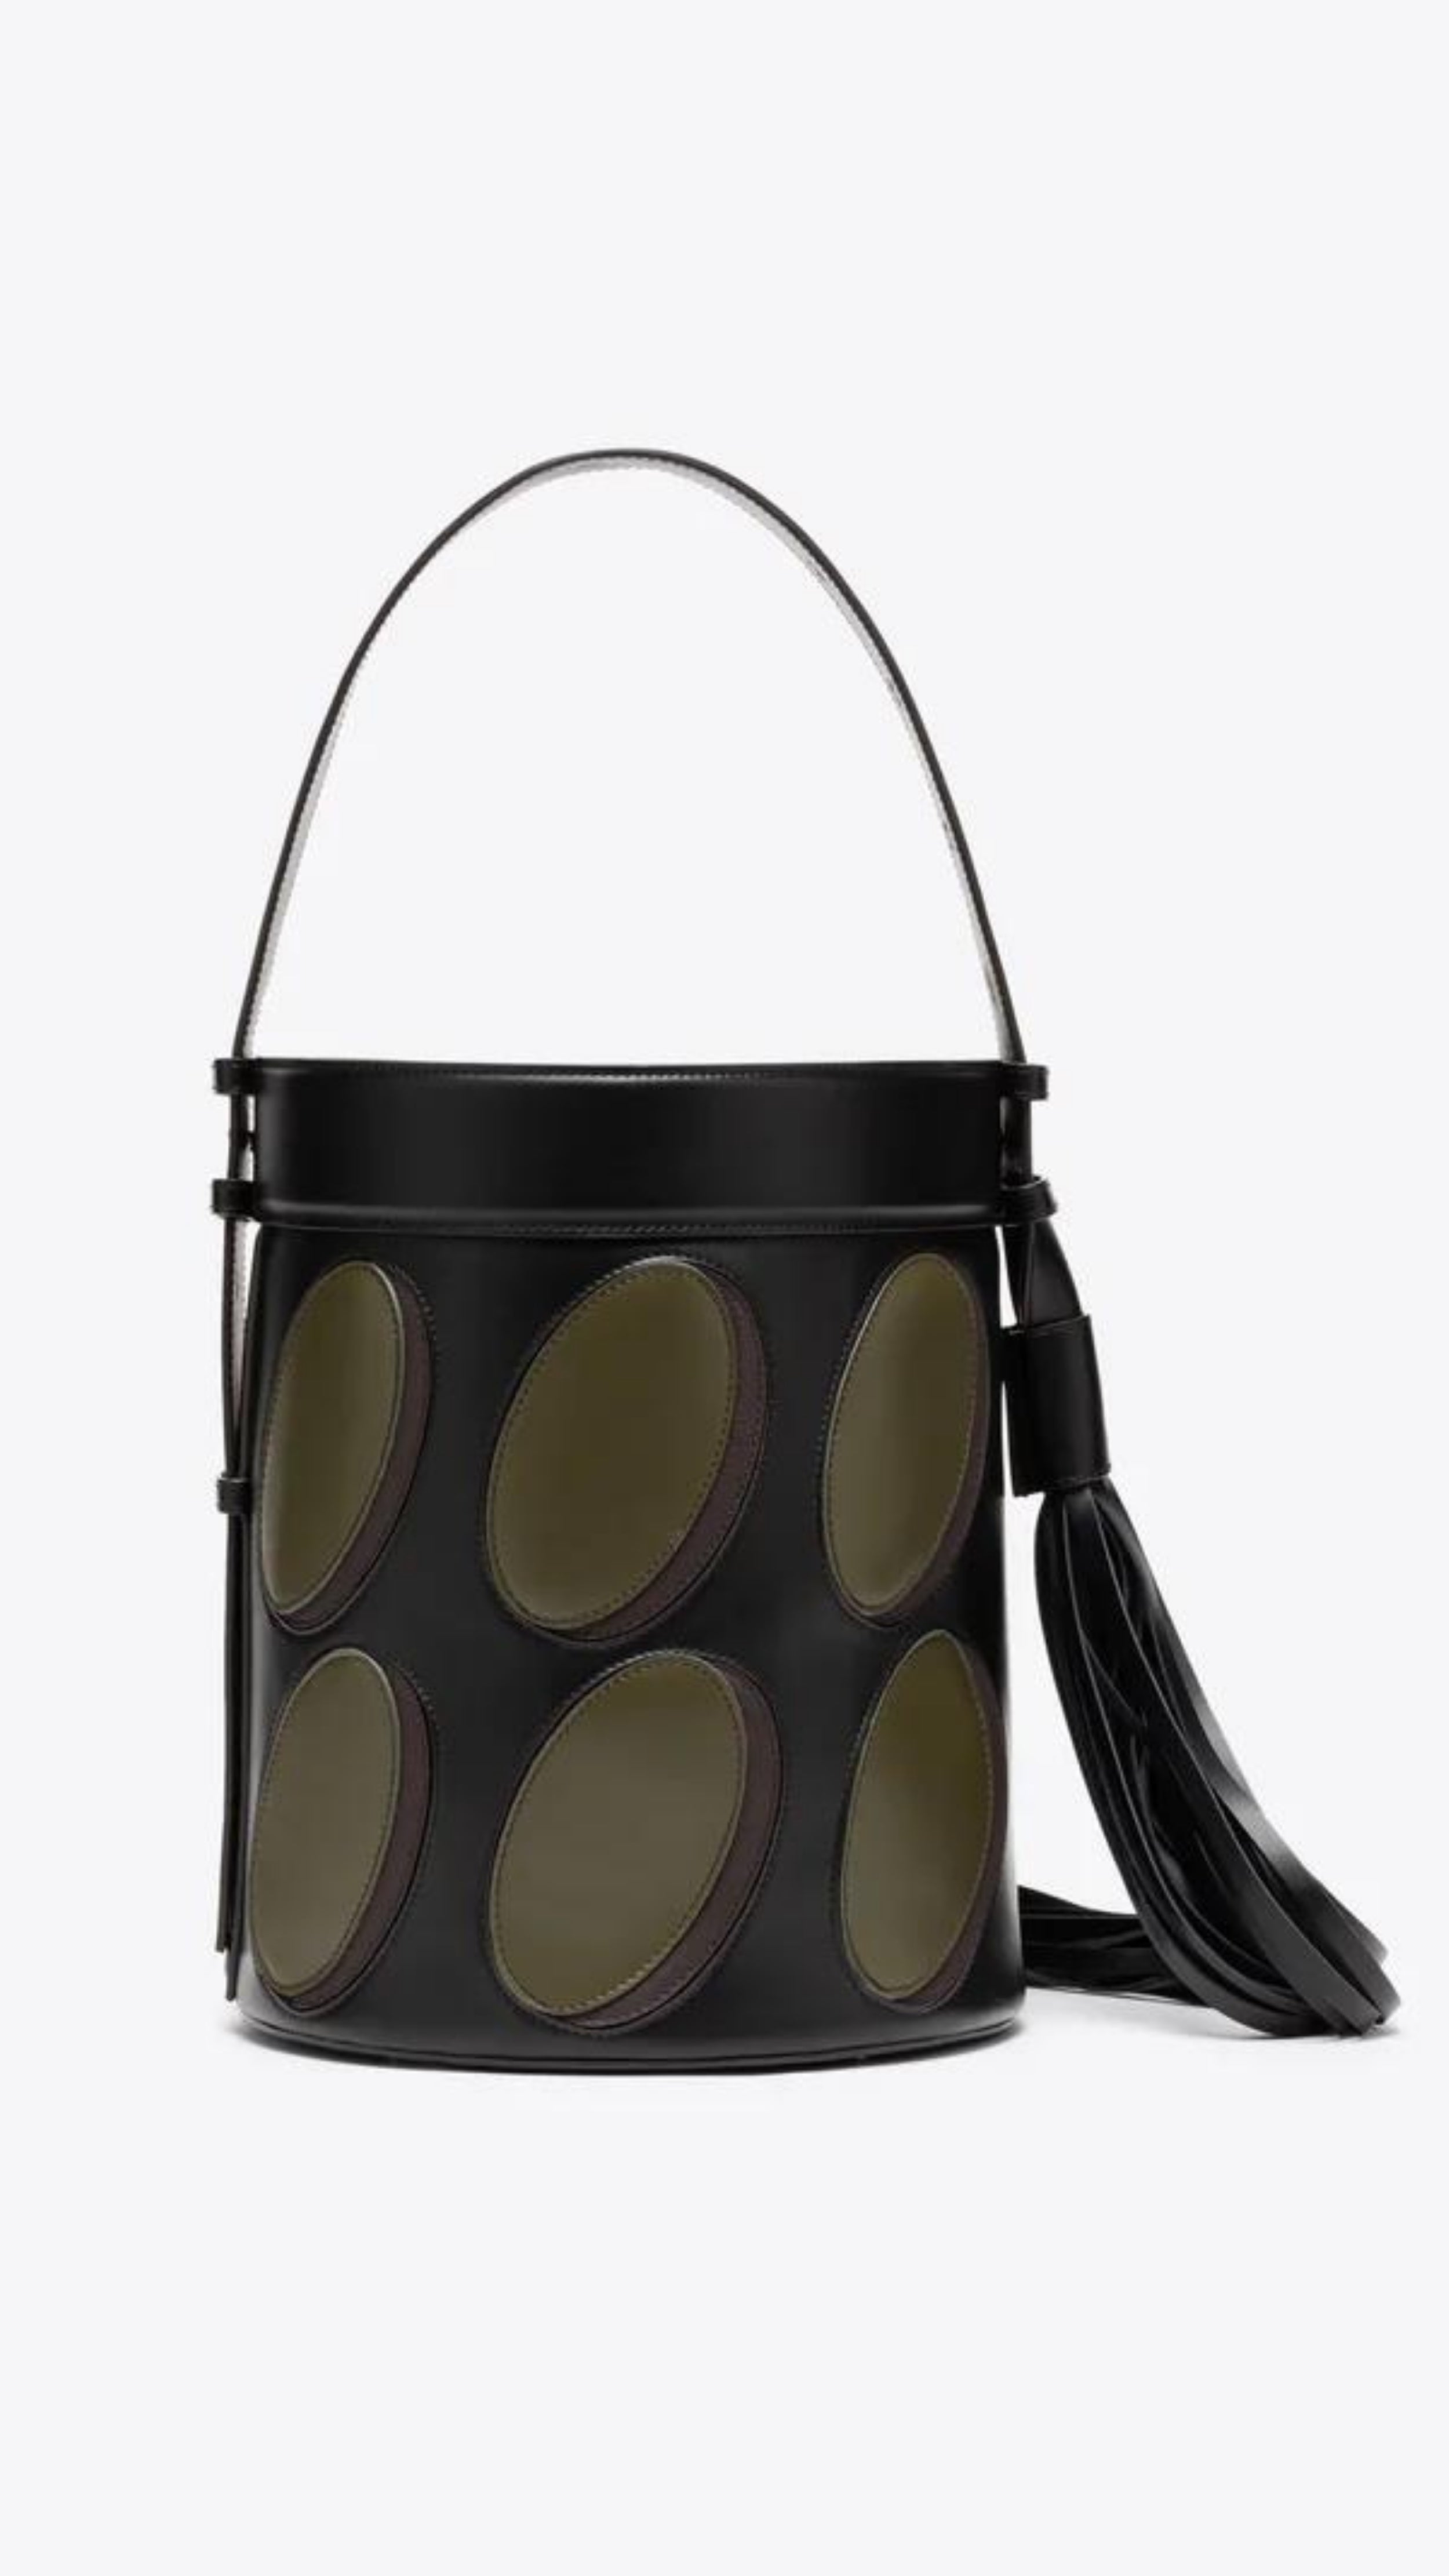 AZ Factory Colville Molly Molloy Lucinda Chambers,  Leather Patchwork Midi Bucket Bag.. Black oval bucket back in black leather with olive green ovals patches. Has an adjustable black handle and a dramatic oversize black leather tassel. Product shown from the back.